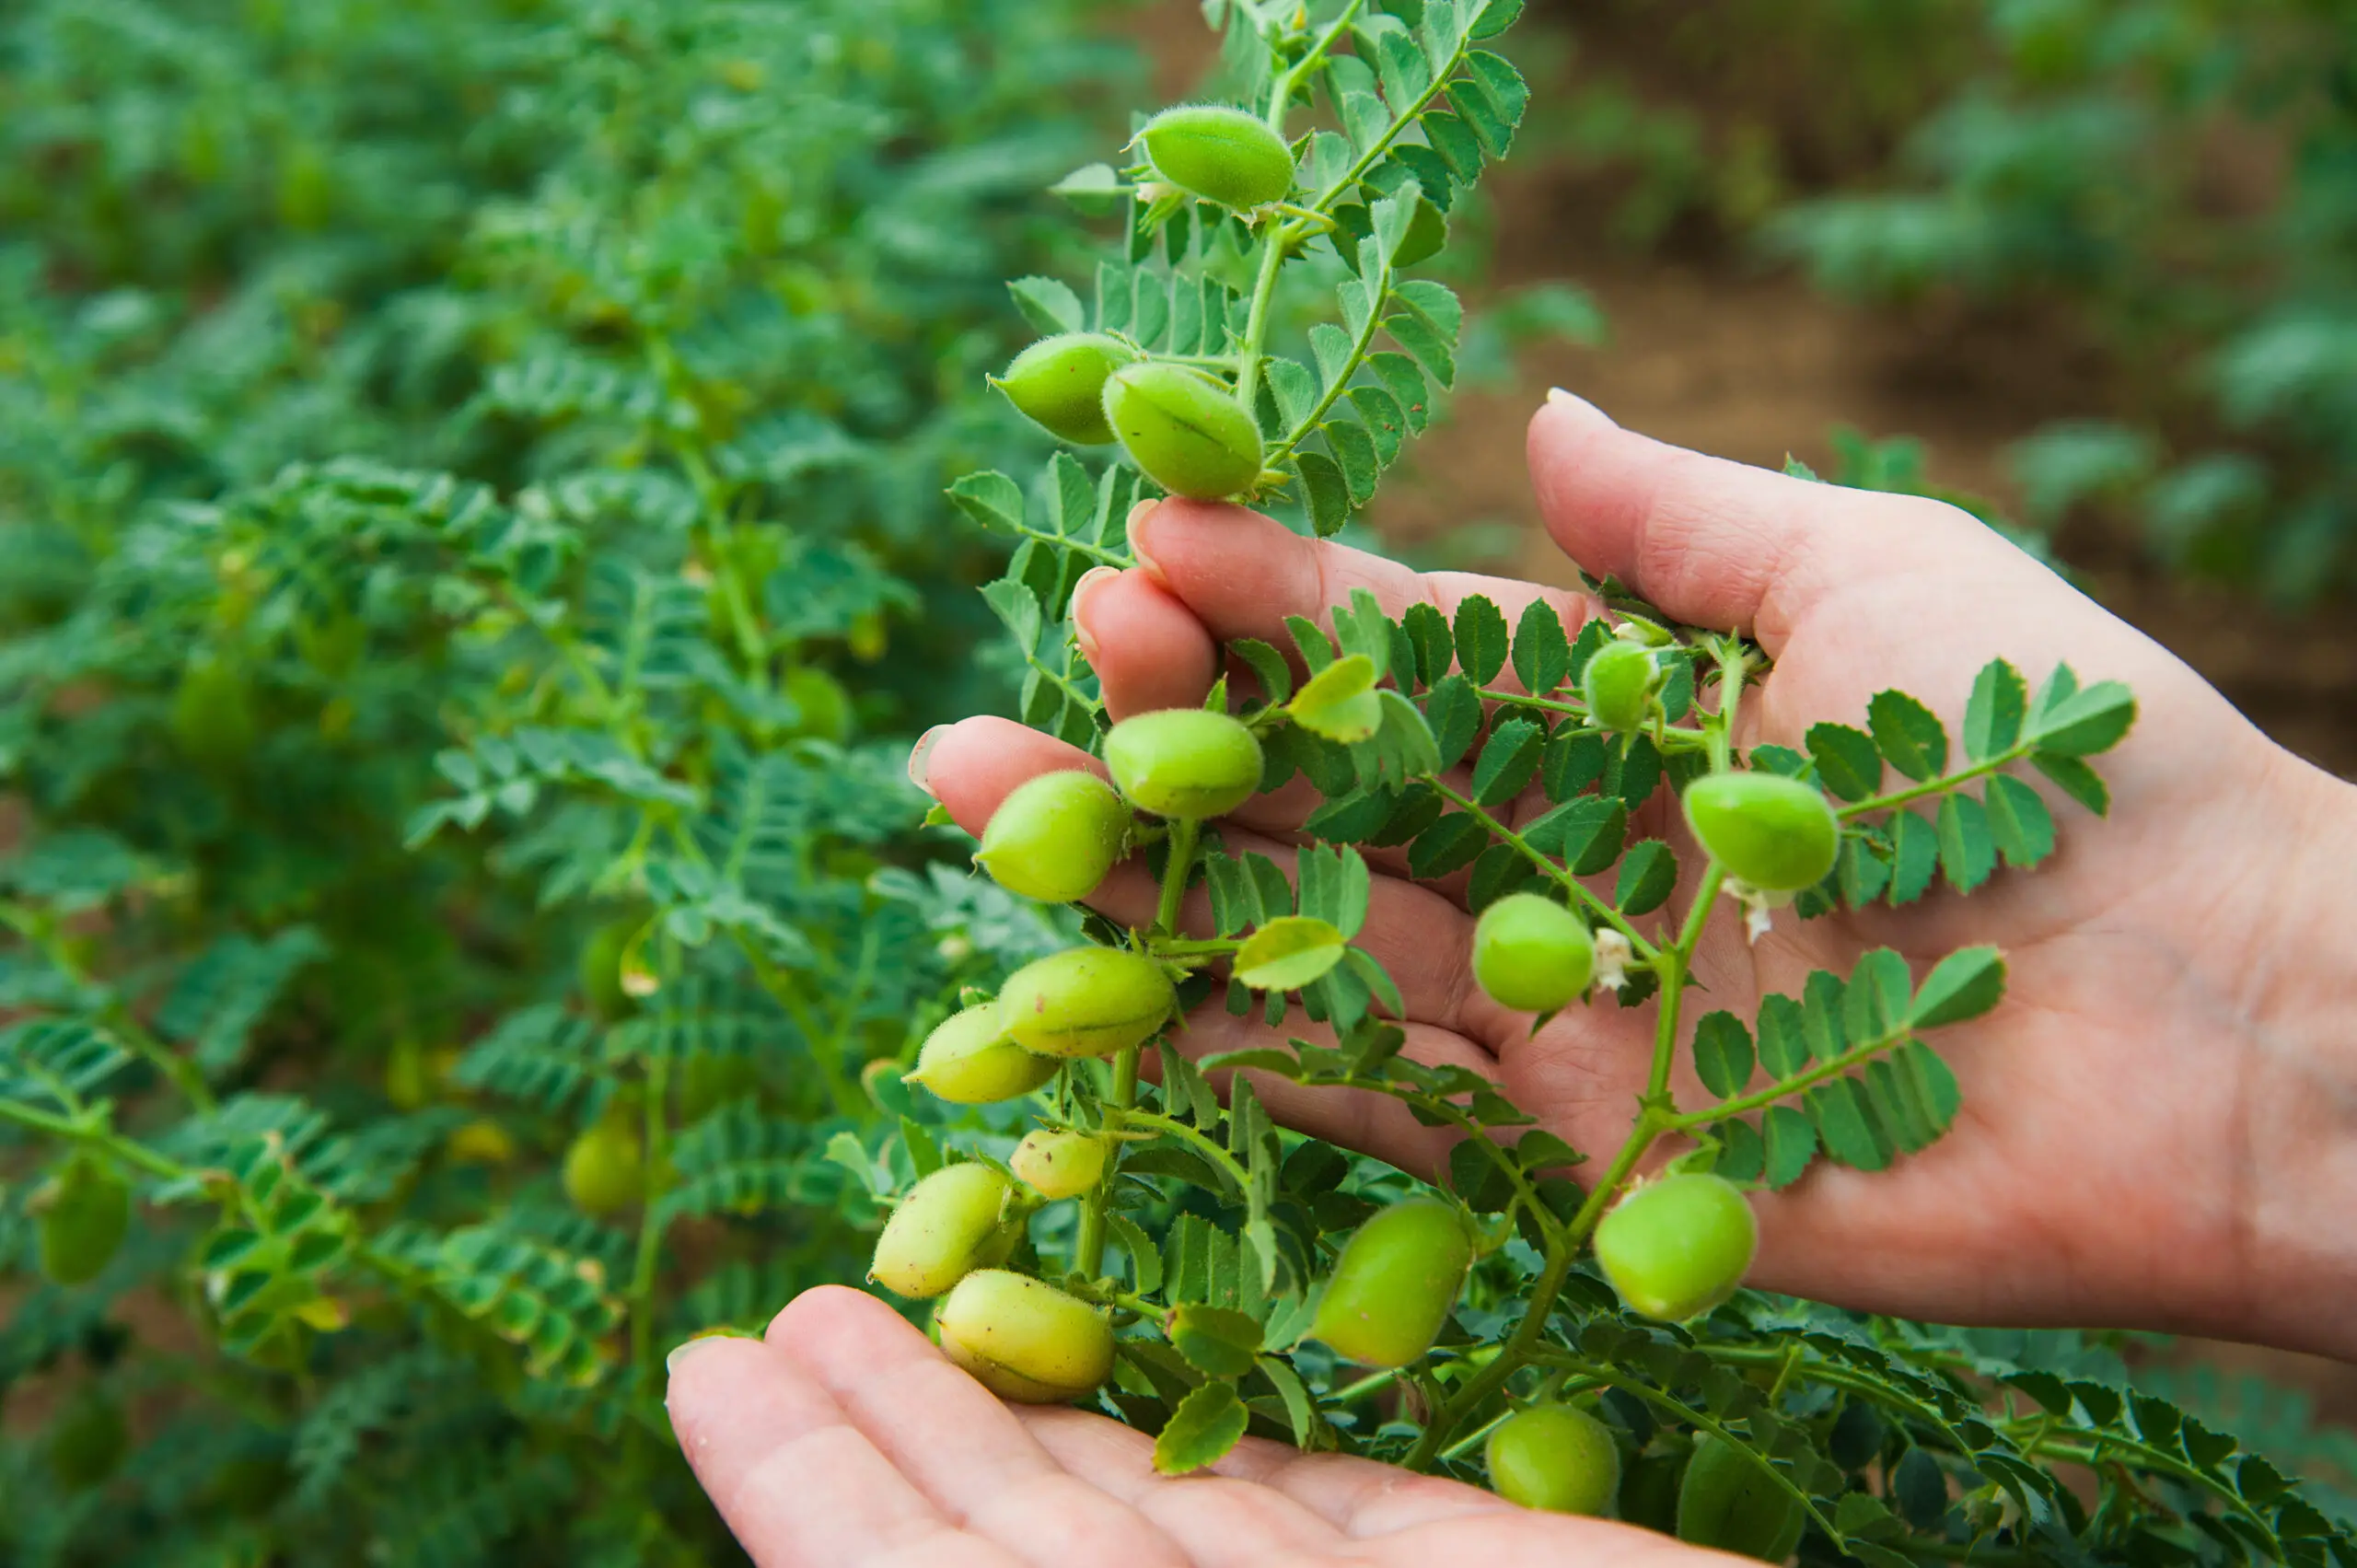 How To Grow Chickpea Plants - Step-by-Step Guide - Patricia Blog